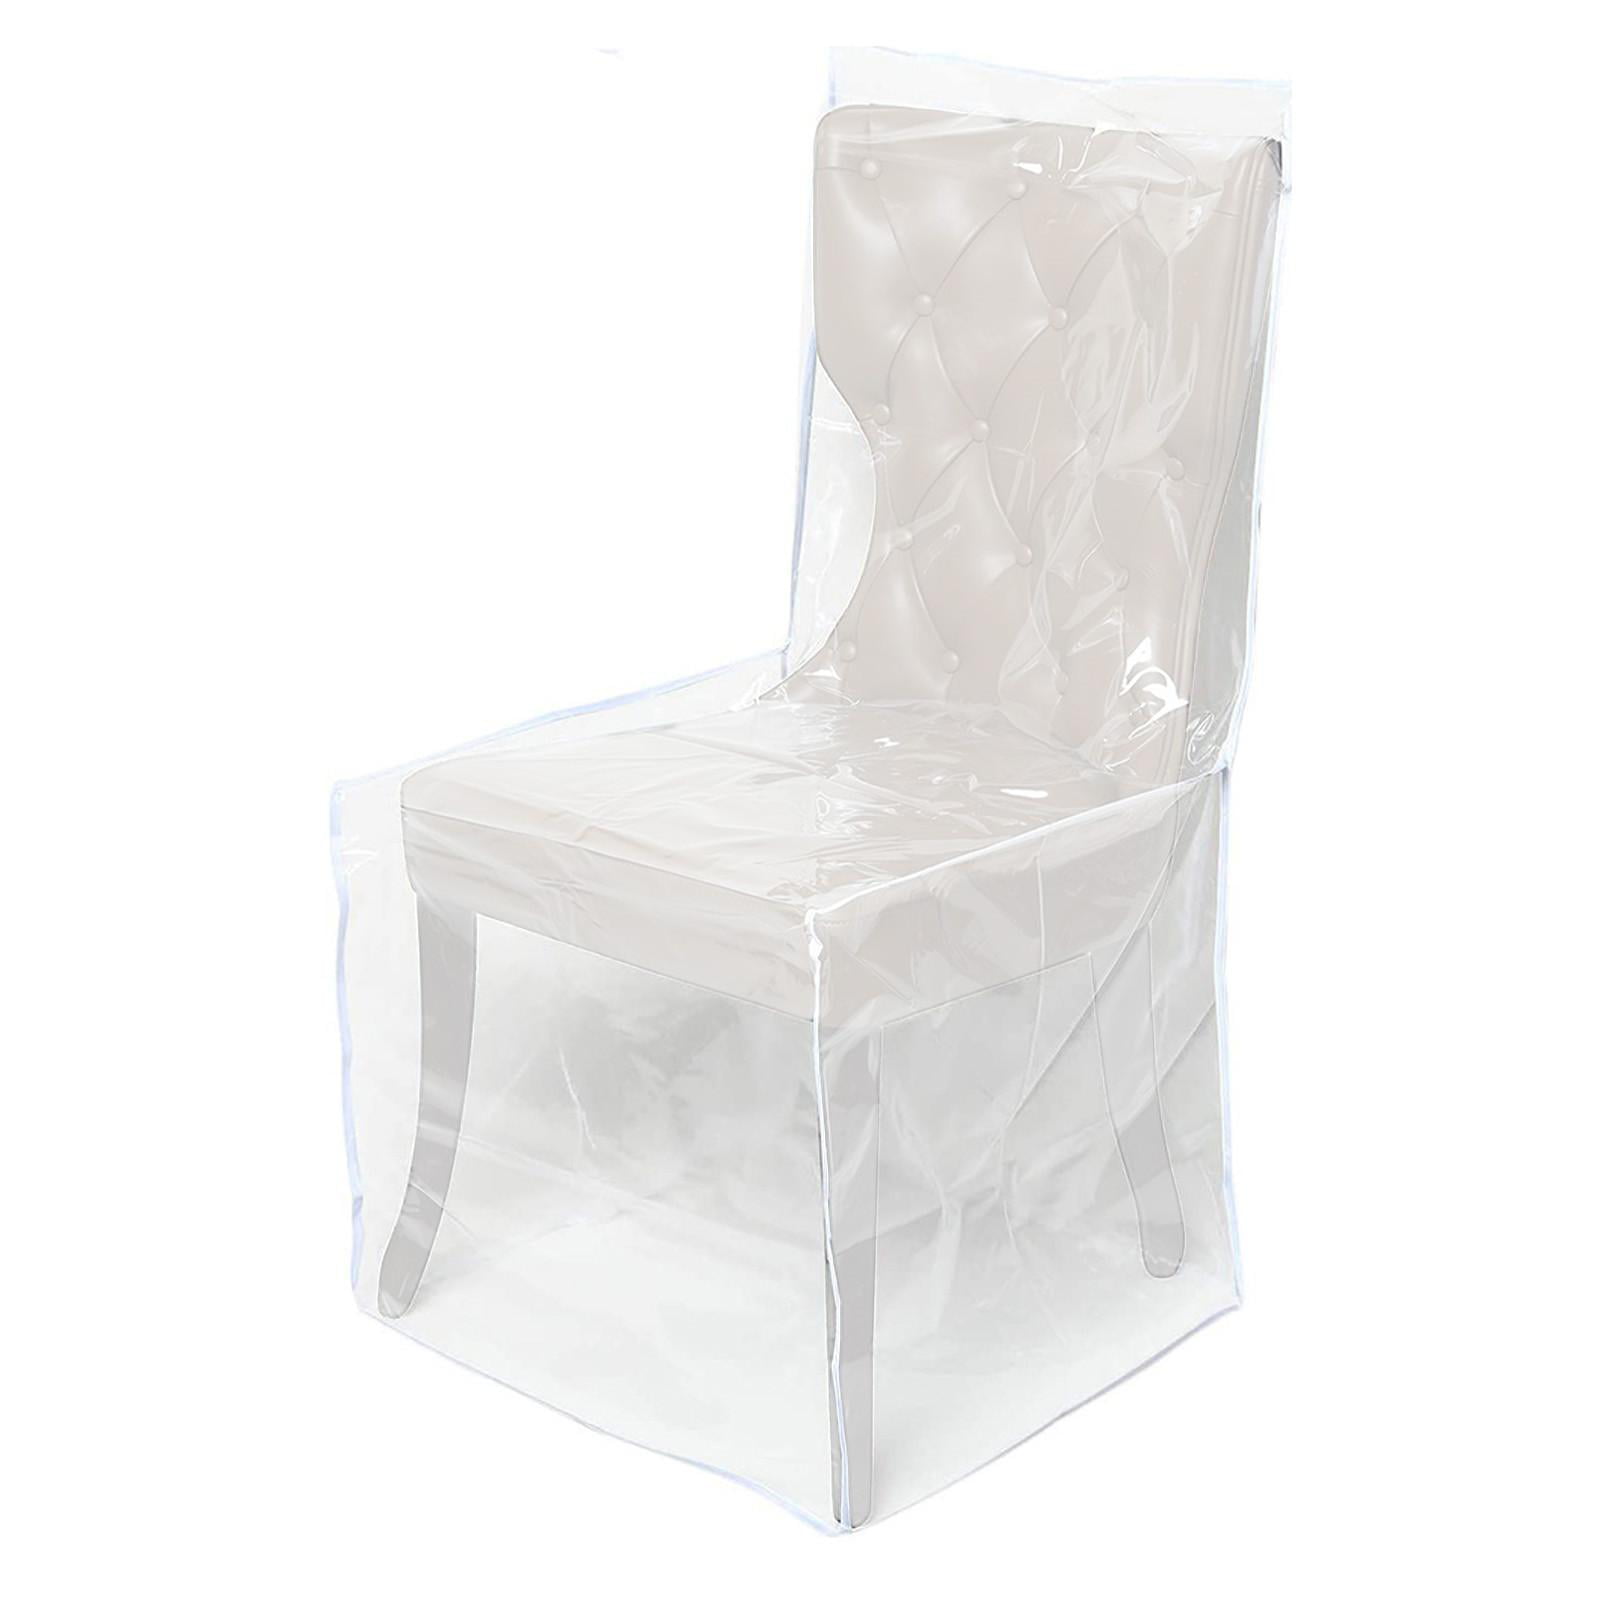 New Plastic Chair Covers Walmart with Simple Decor